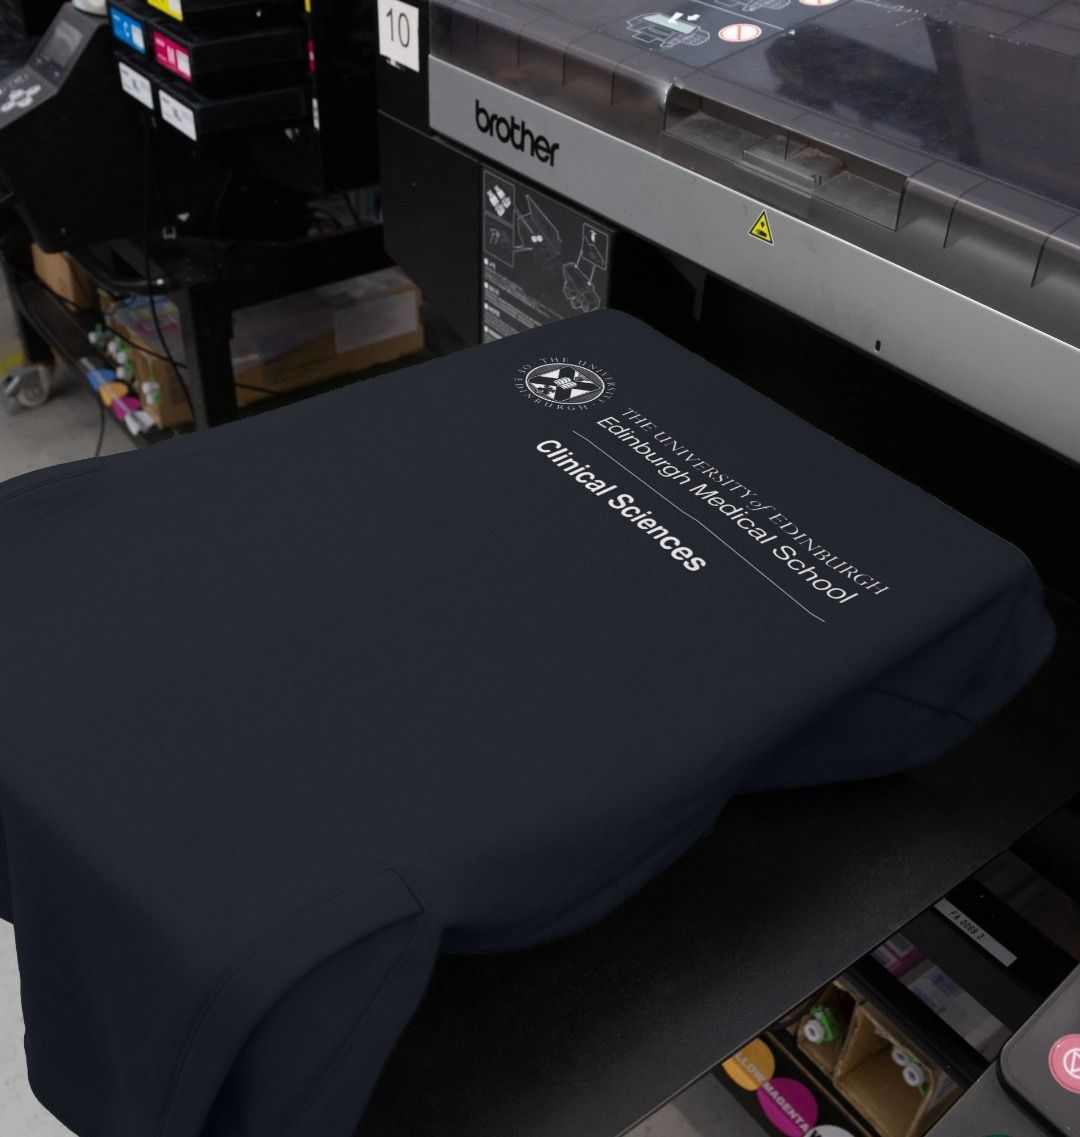 Our Edinburgh Medical School - Clinical  Sciences Hoodie being printed by our print on demand partner, teemill.